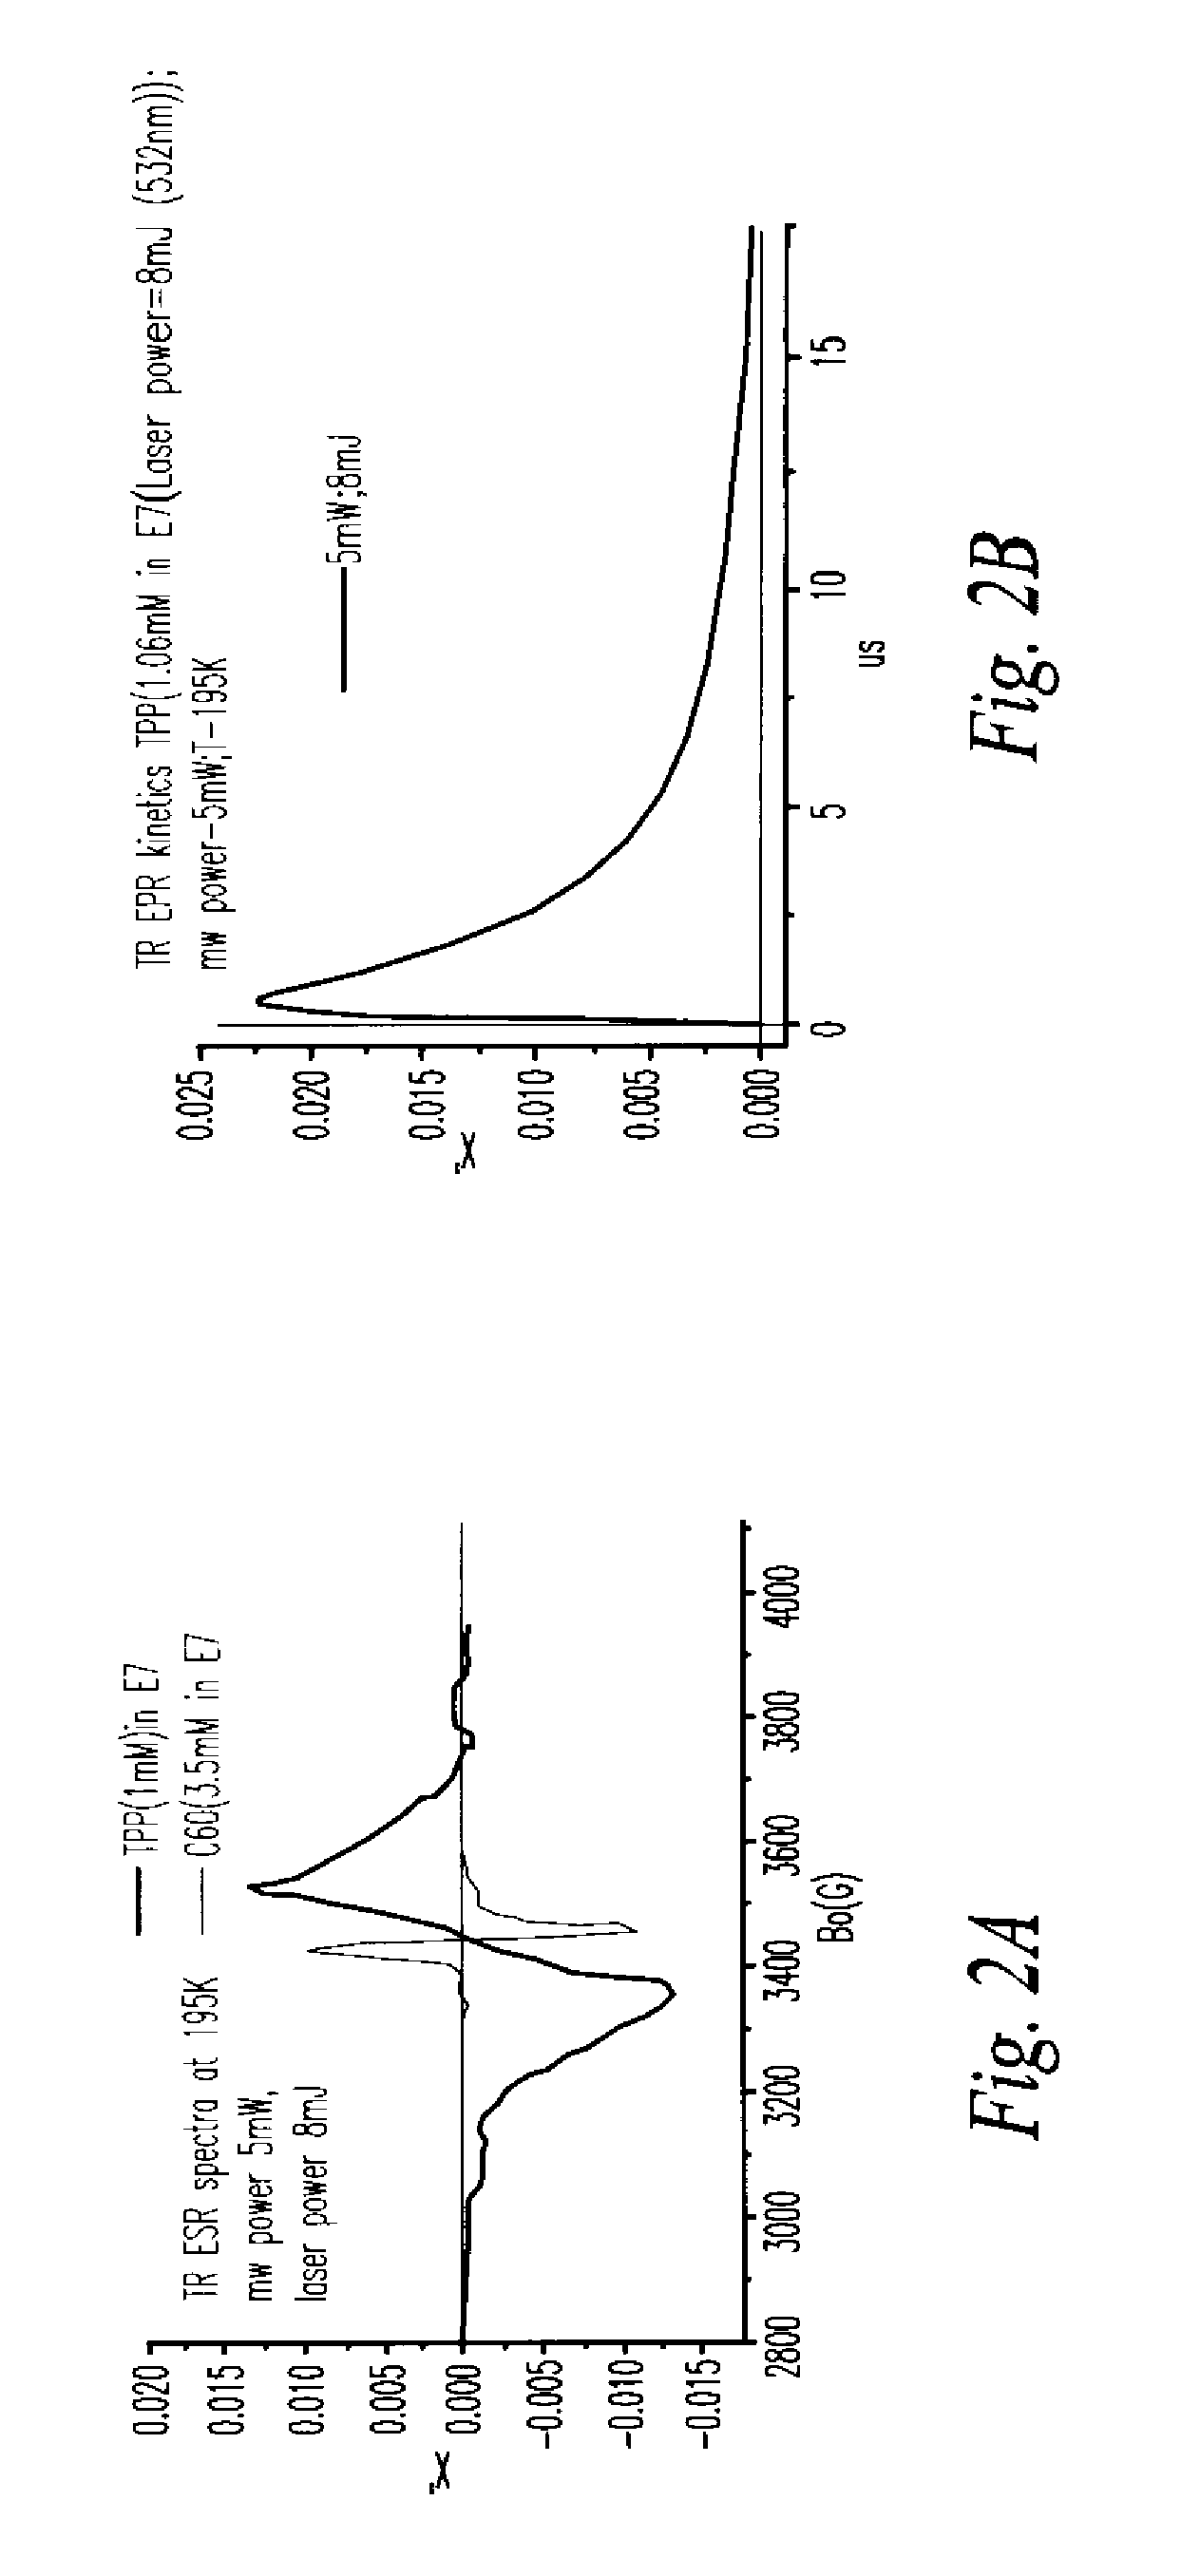 Optically pumped magnetically controlled paramagnetic devices for microwave electronics and particle accelerator applications